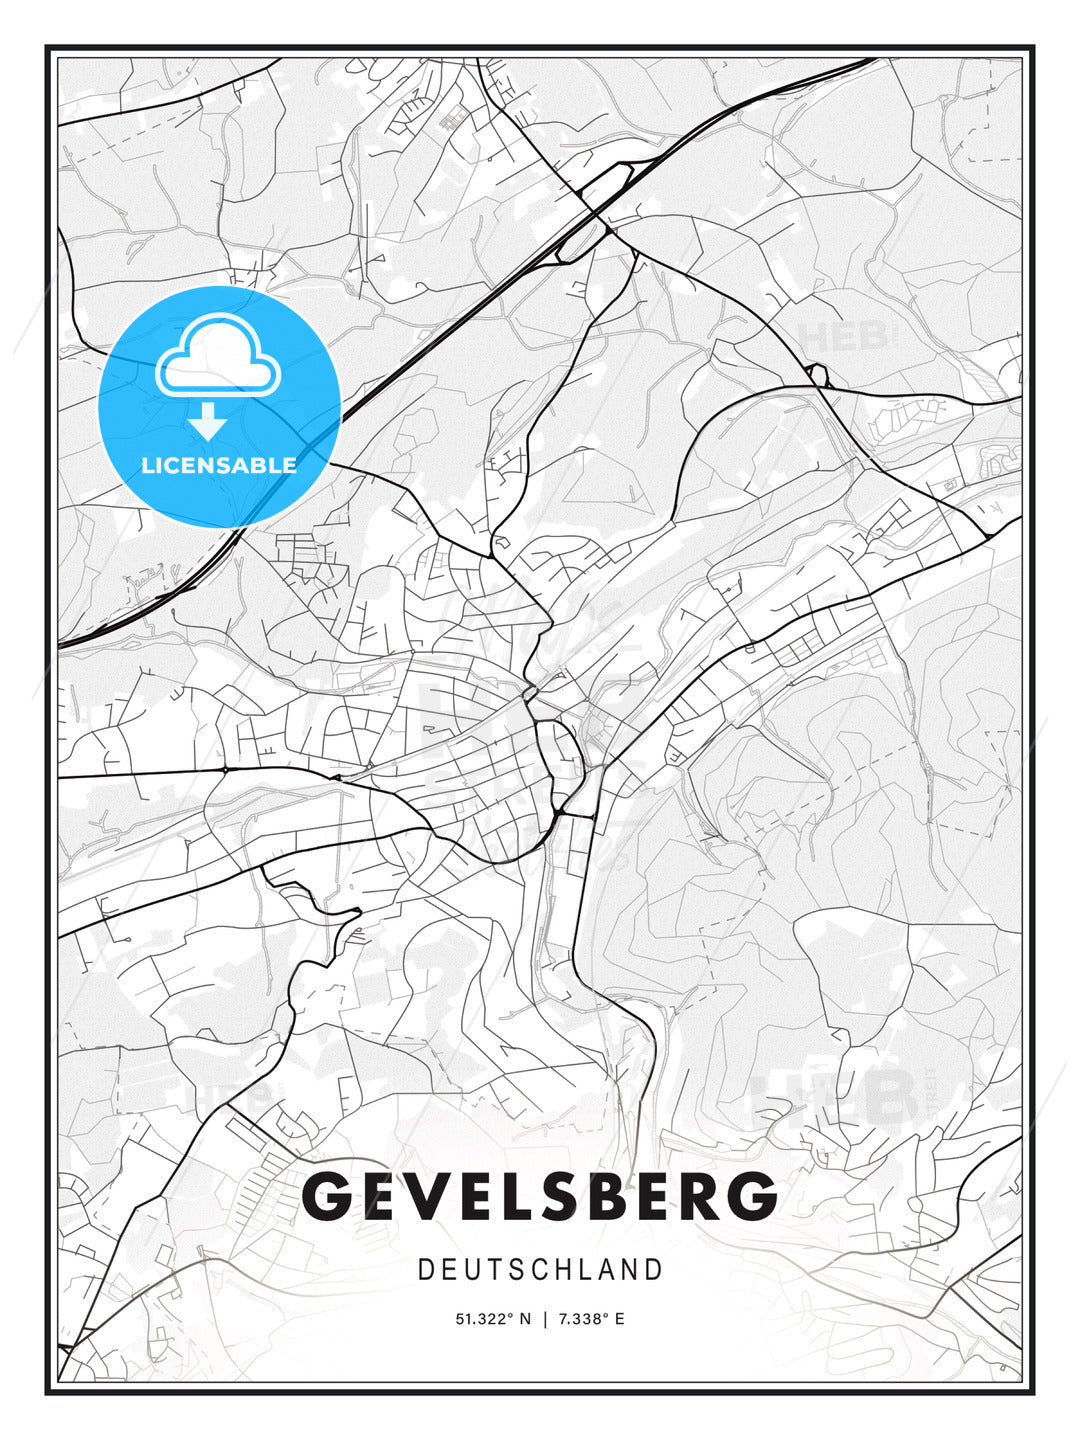 Gevelsberg, Germany, Modern Print Template in Various Formats - HEBSTREITS Sketches